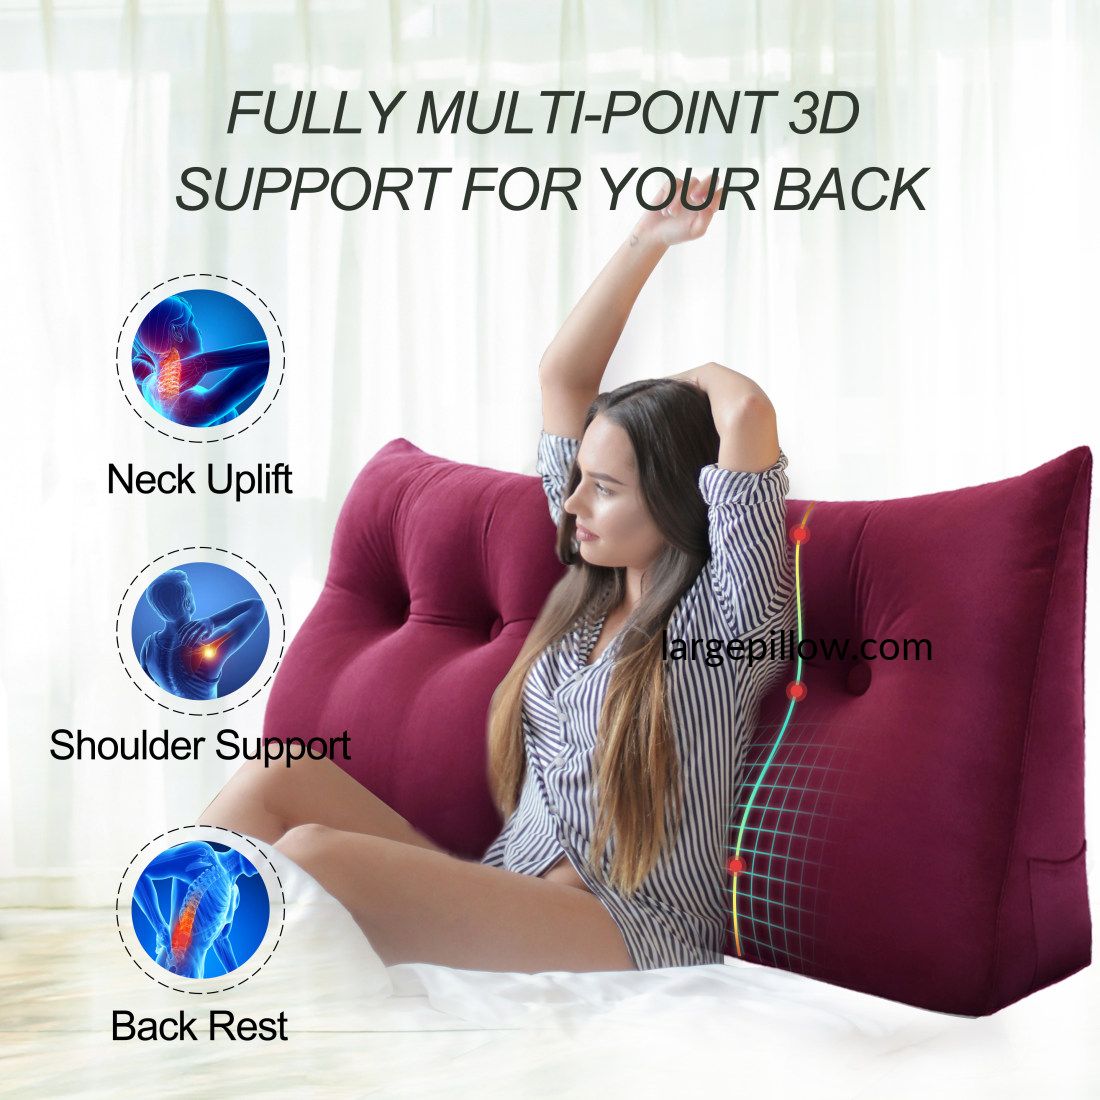 VERCART Triangular Bed Wedge Pillow Back Support Backrest Reading Pillows  for Lumbar and Sitting Up, Decorative Throw Office Chair Sofa Couch with